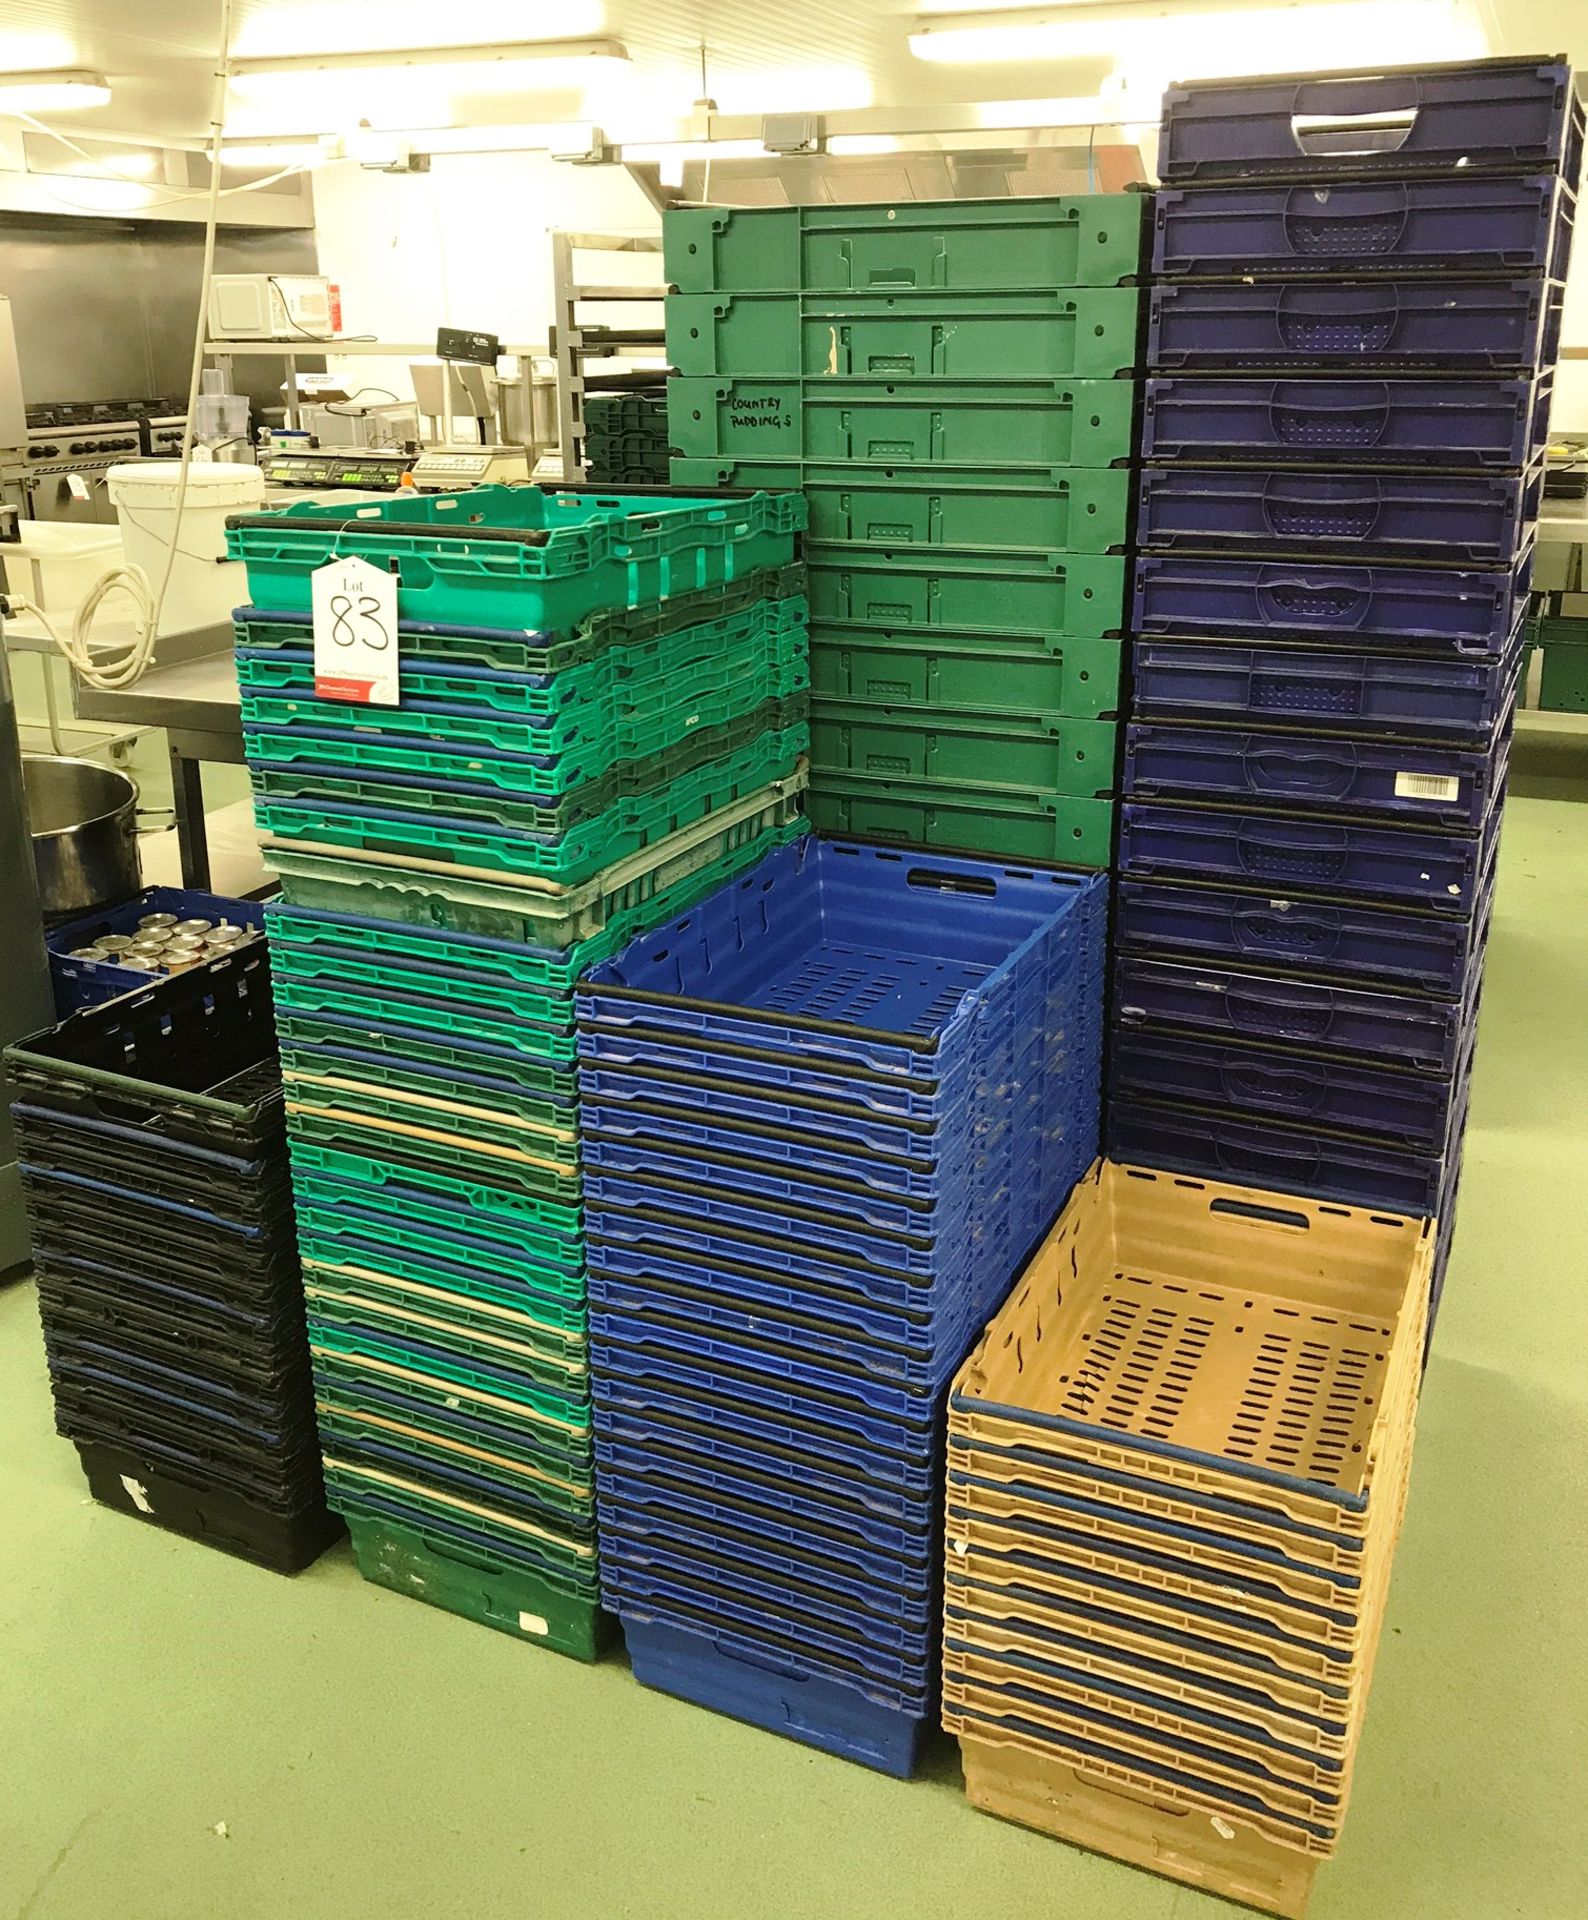 Large Quantity of Plastic Stackable Trays - As Pictured